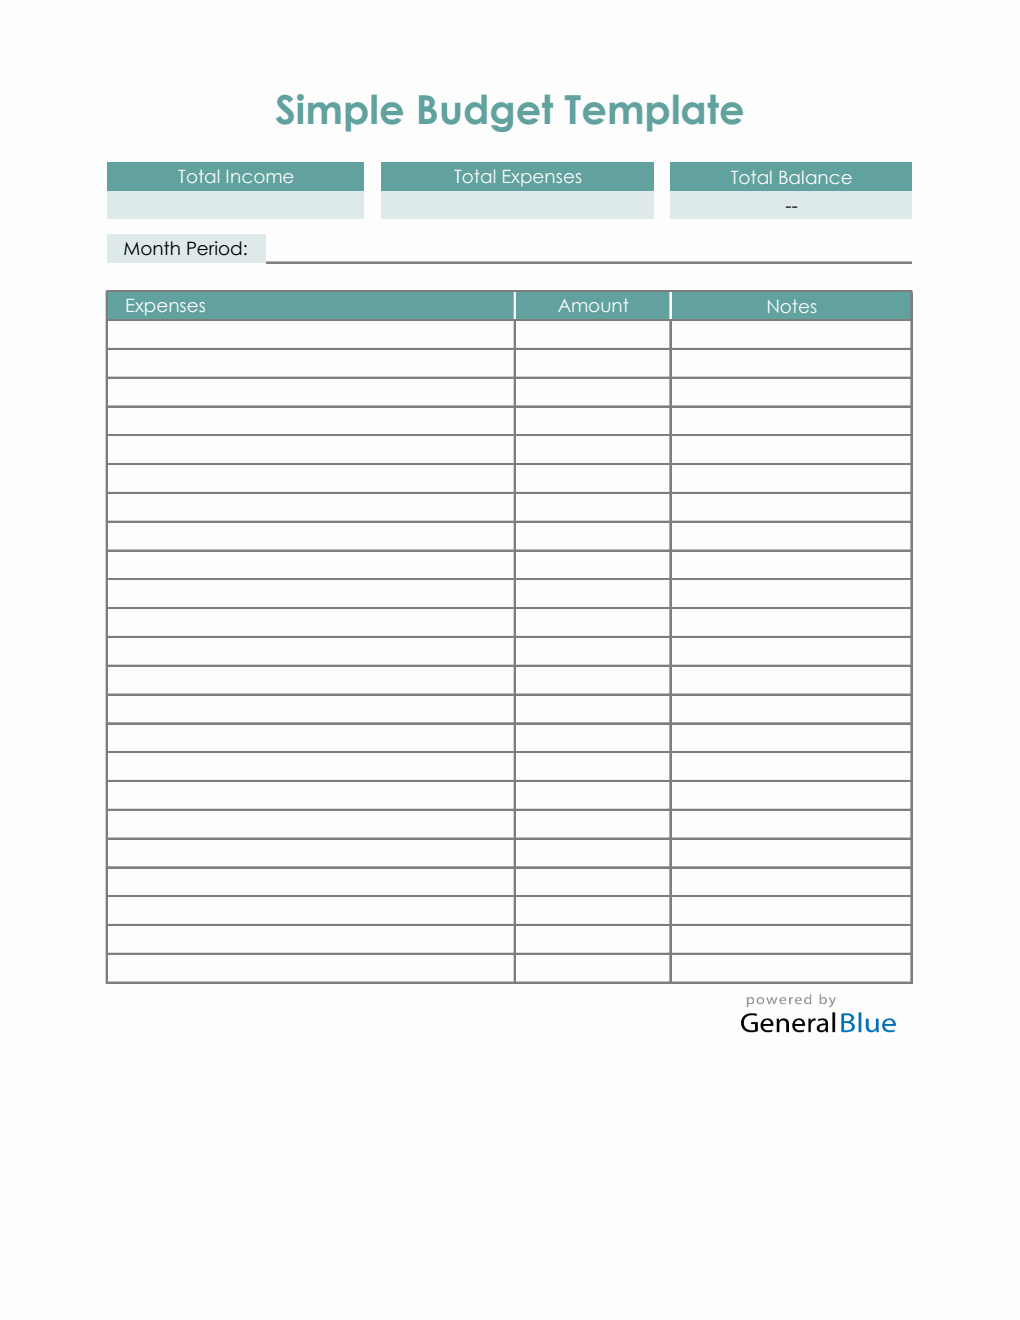 Simple Budget Template in Excel